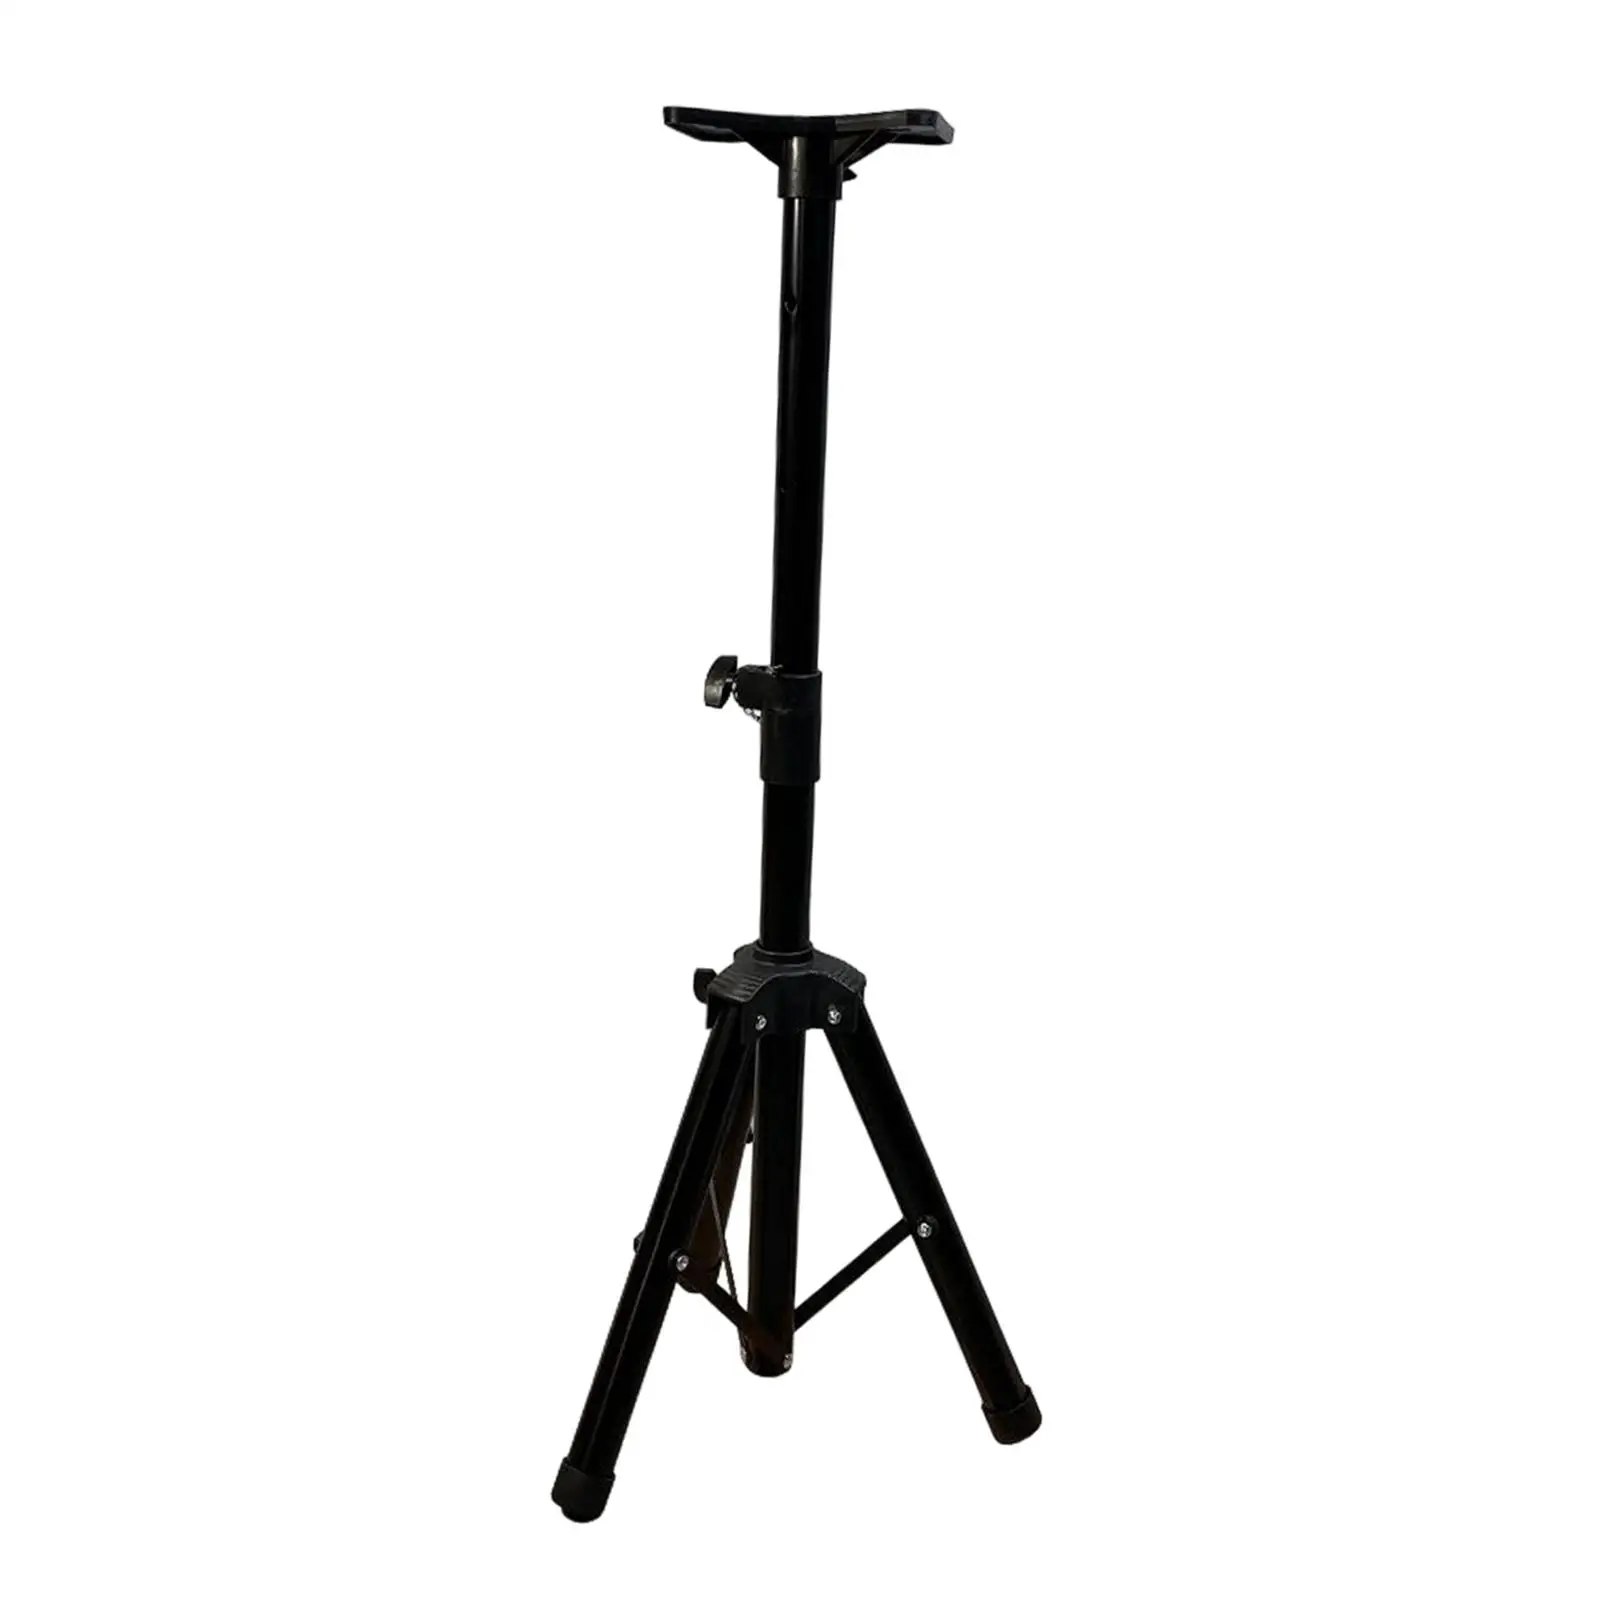 Target Stand Easy to Install Plastic 115cm, 98cm,85cm,78cm for Outdoor